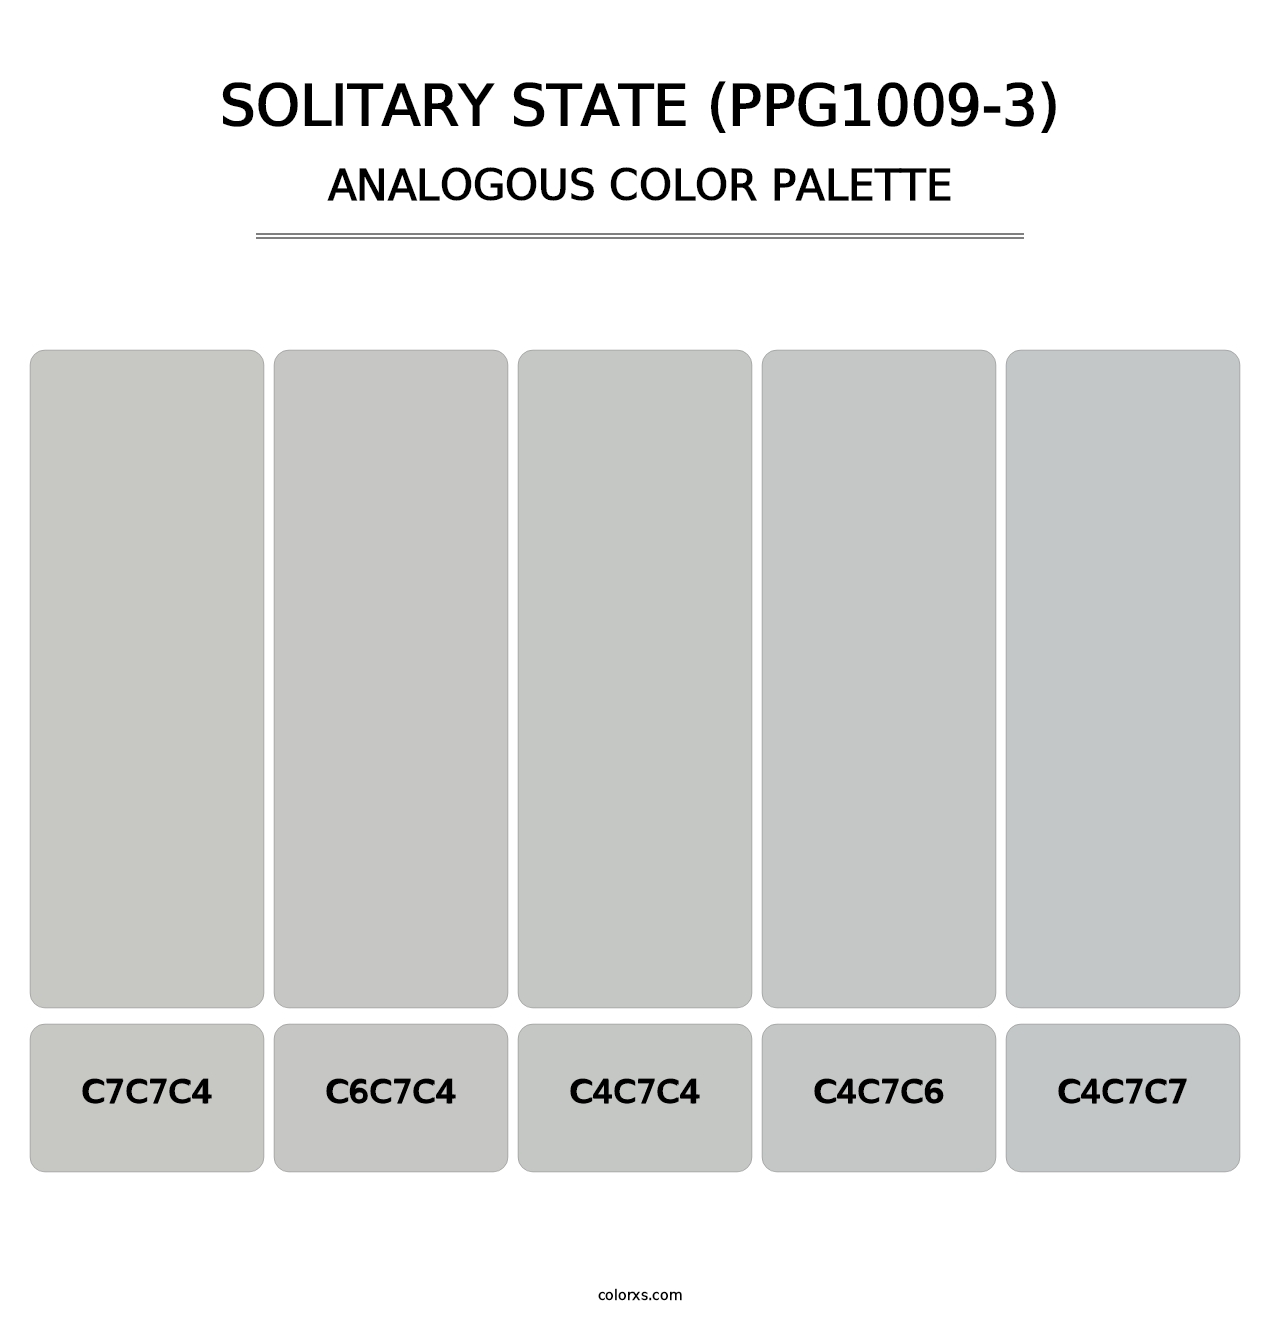 Solitary State (PPG1009-3) - Analogous Color Palette